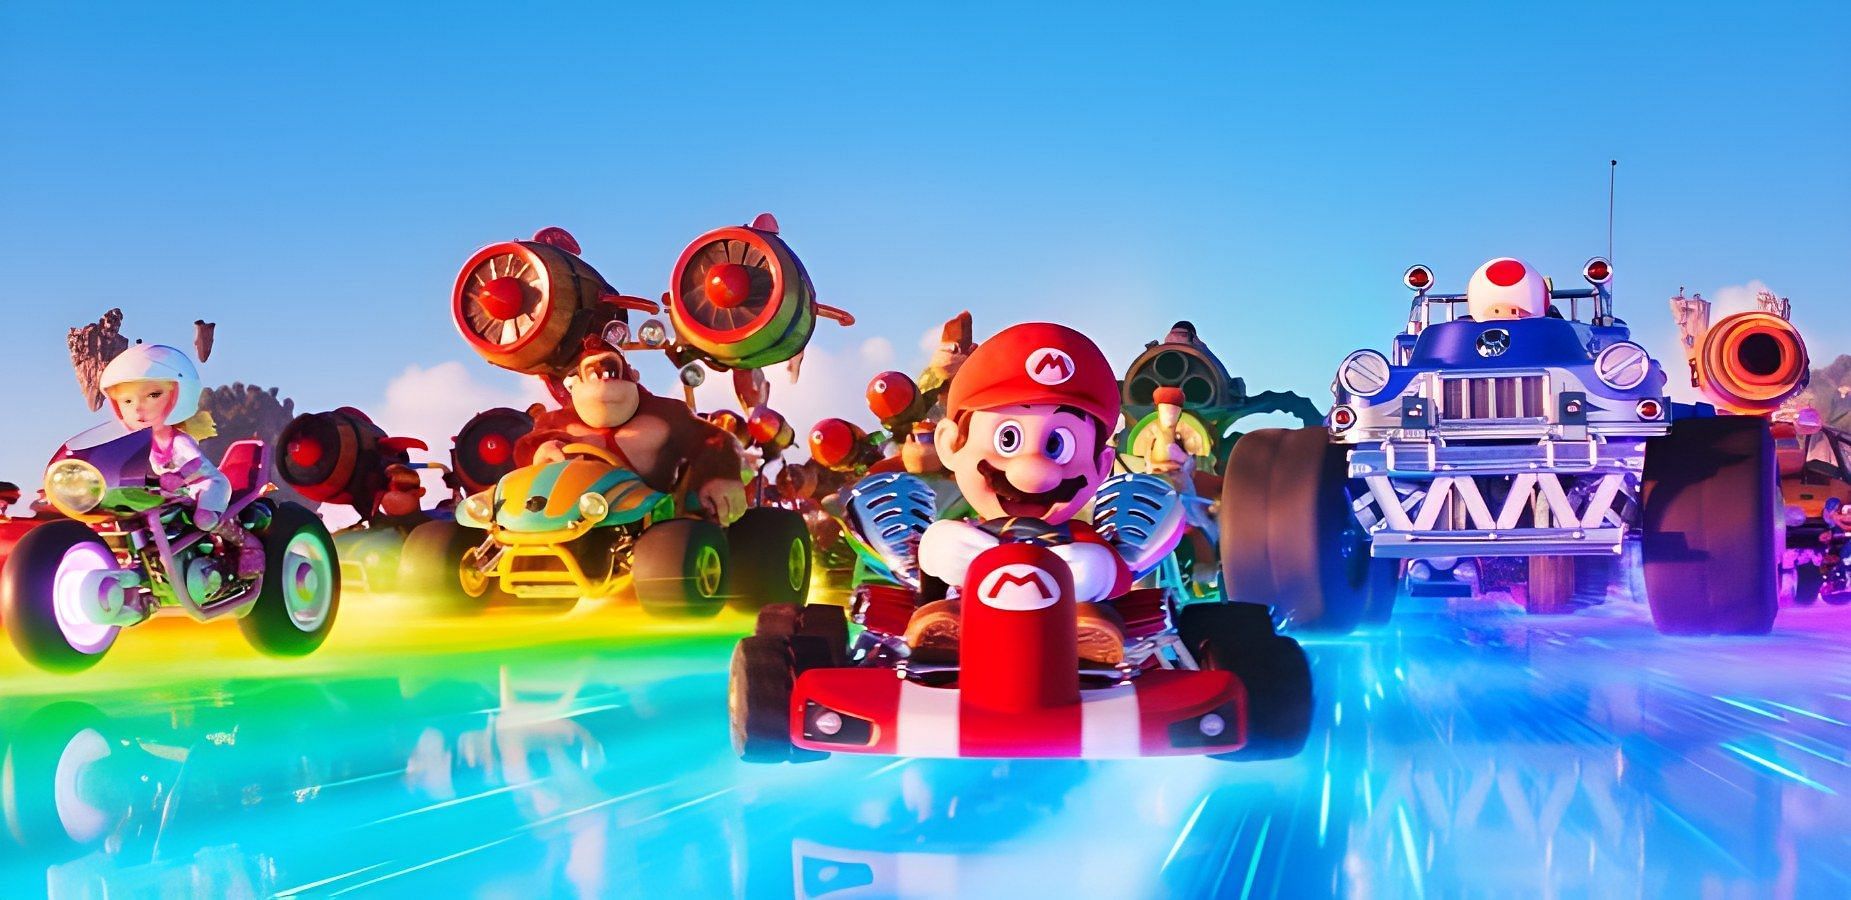 The Rainbow Road course is a fan favorite, as it tests both the skill and strategy of players. (Image via Universal Pictures)